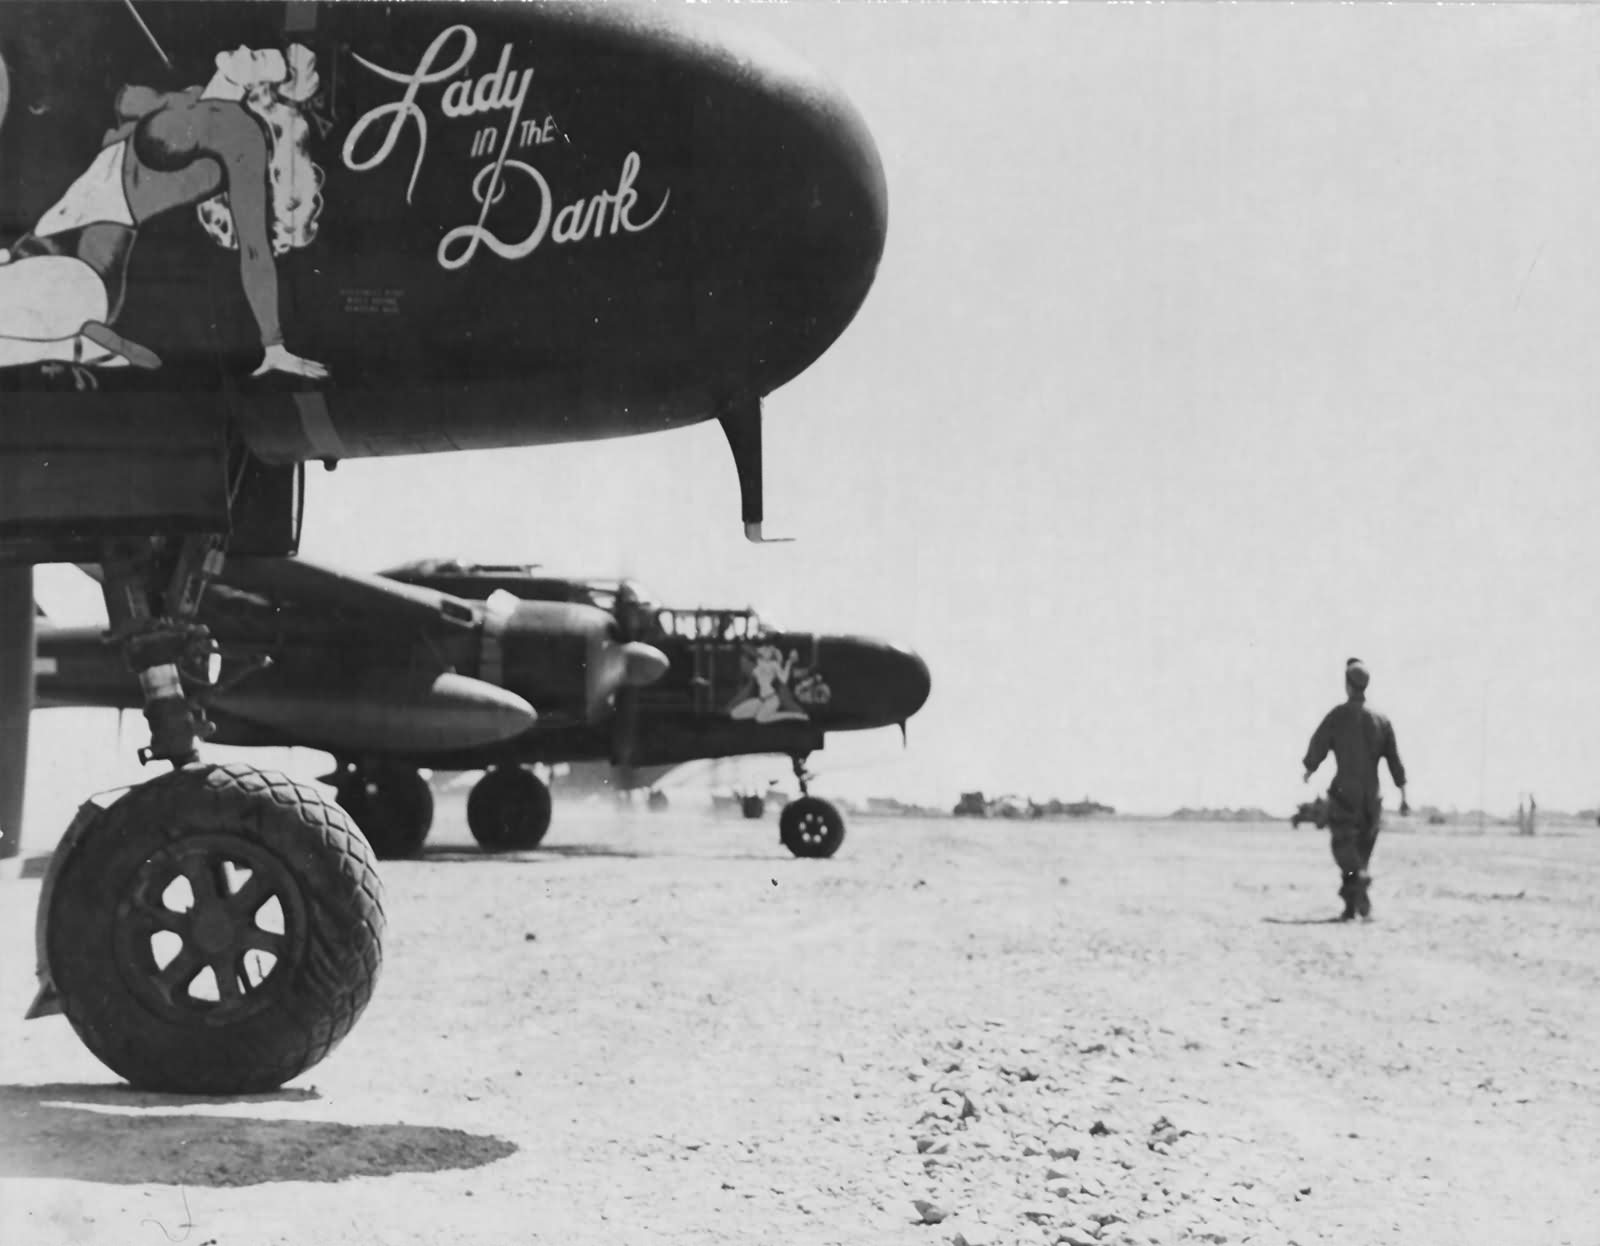 P-61B_42-39408_Lady_In_The_Dark_of_the_548th_Night_Fighter_Squadron_-_42-5609_Bat_Outa_Hell.jpg